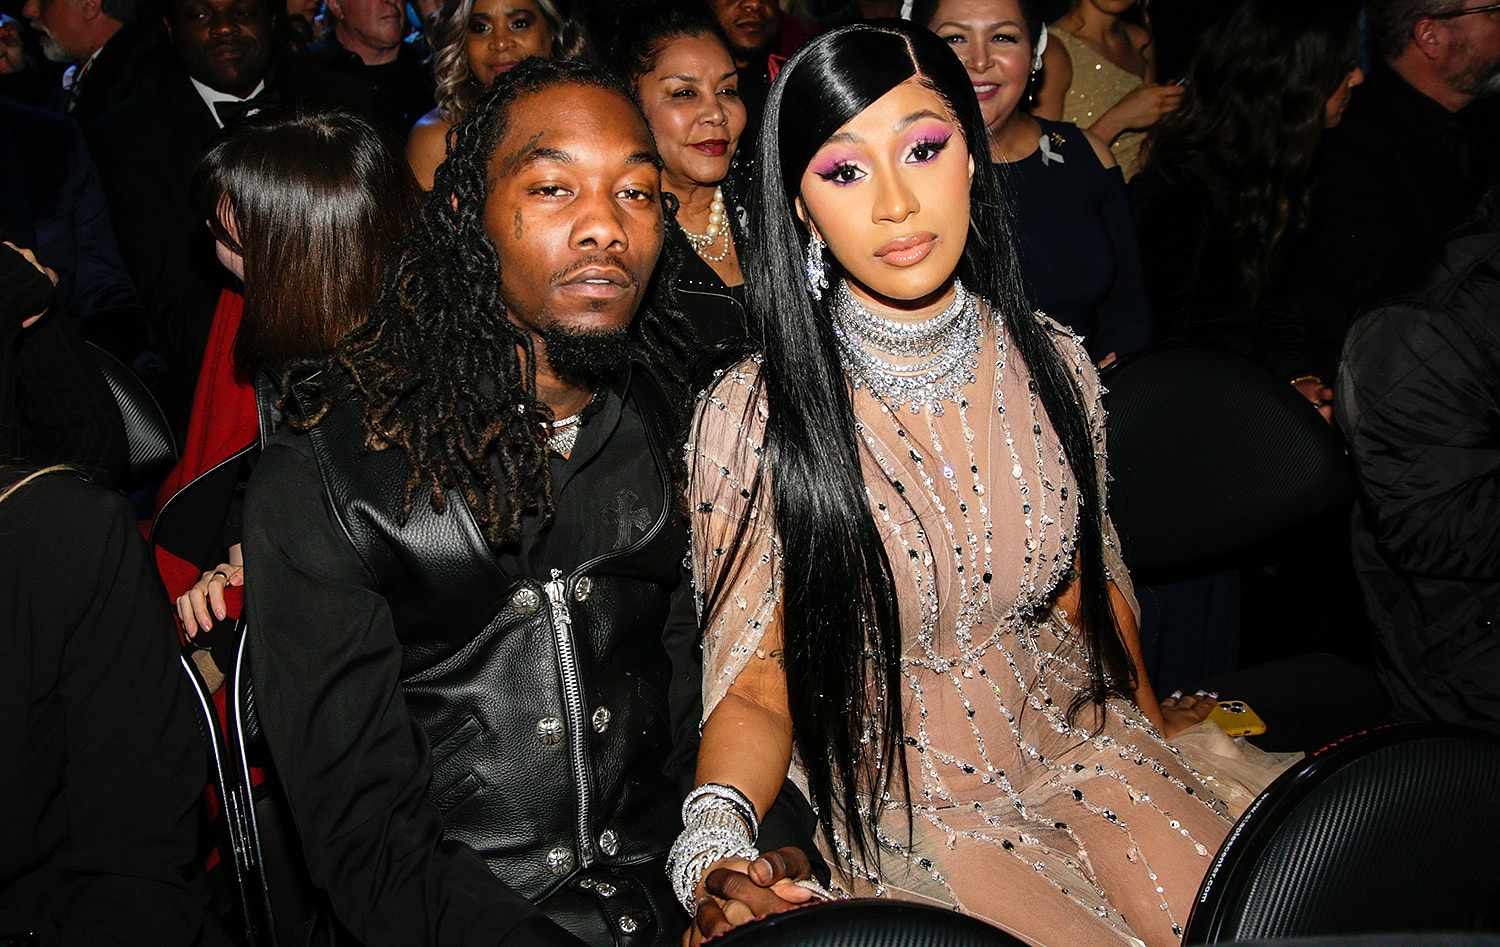 Cardi B And Offset Break Up